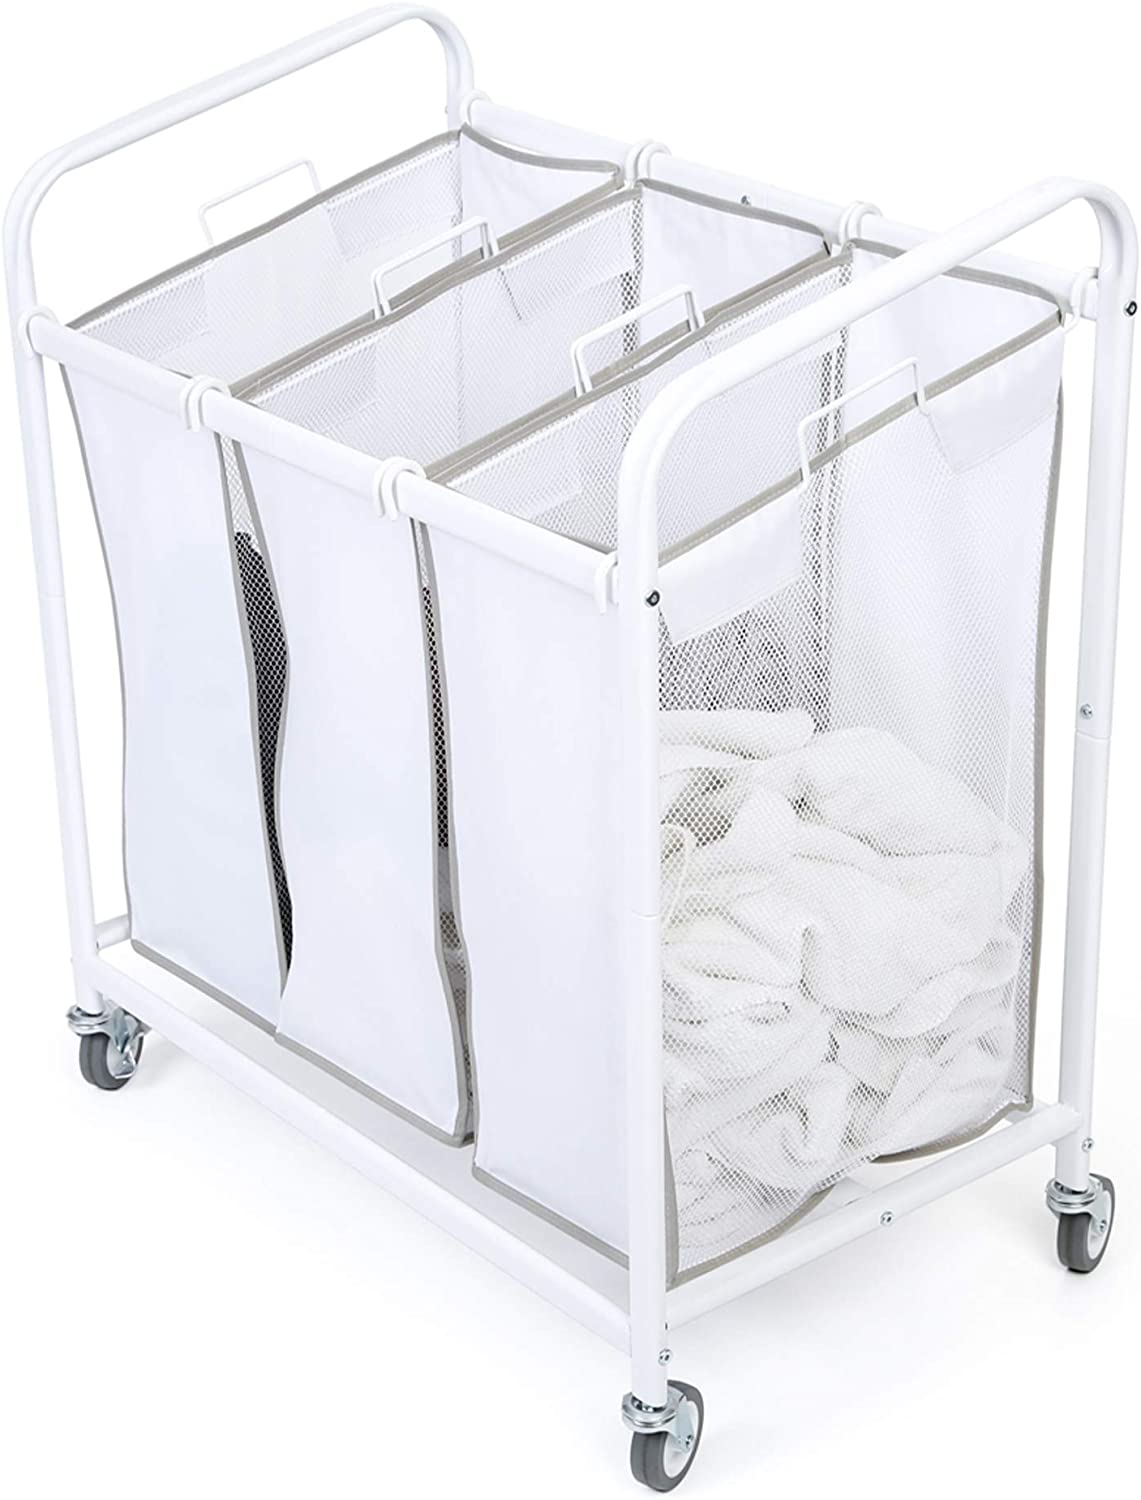 http://www.shopsmartdesign.com/cdn/shop/products/premium-rolling-3-compartment-mesh-laundry-sorter-hamper-with-wheels-and-handles-holds-9-loads-smart-design-laundry-3604110-incrementing-number-268388.jpg?v=1679337731